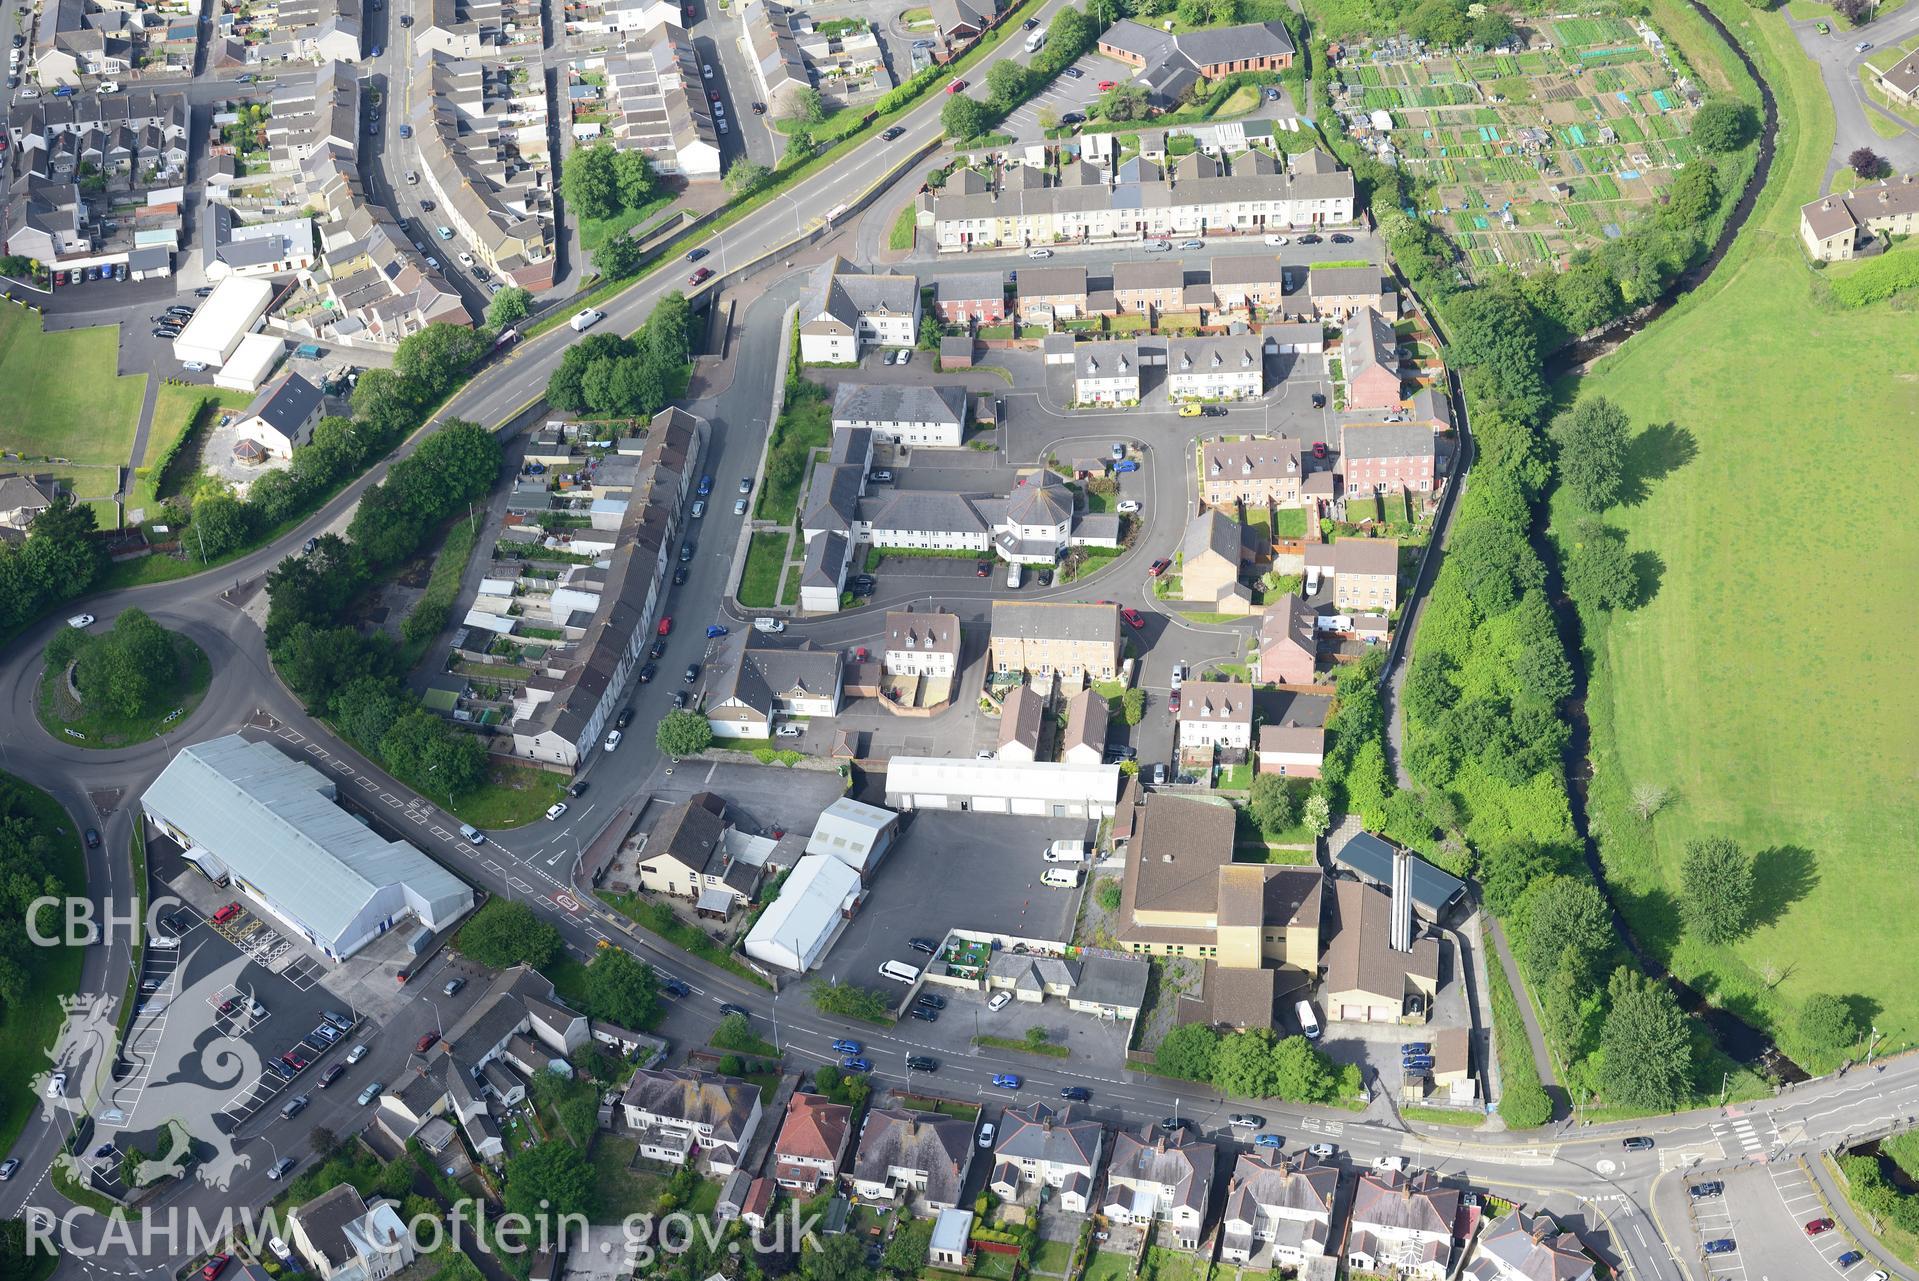 Salvation Army Church and housing on or near the site of the former Llanelli Slaughter house; Llanelli Union Workhouse and Talsarnau Colliery. Oblique aerial photograph taken during the Royal Commission's programme of archaeological aerial reconnaissance by Toby Driver on 19th June 2015.